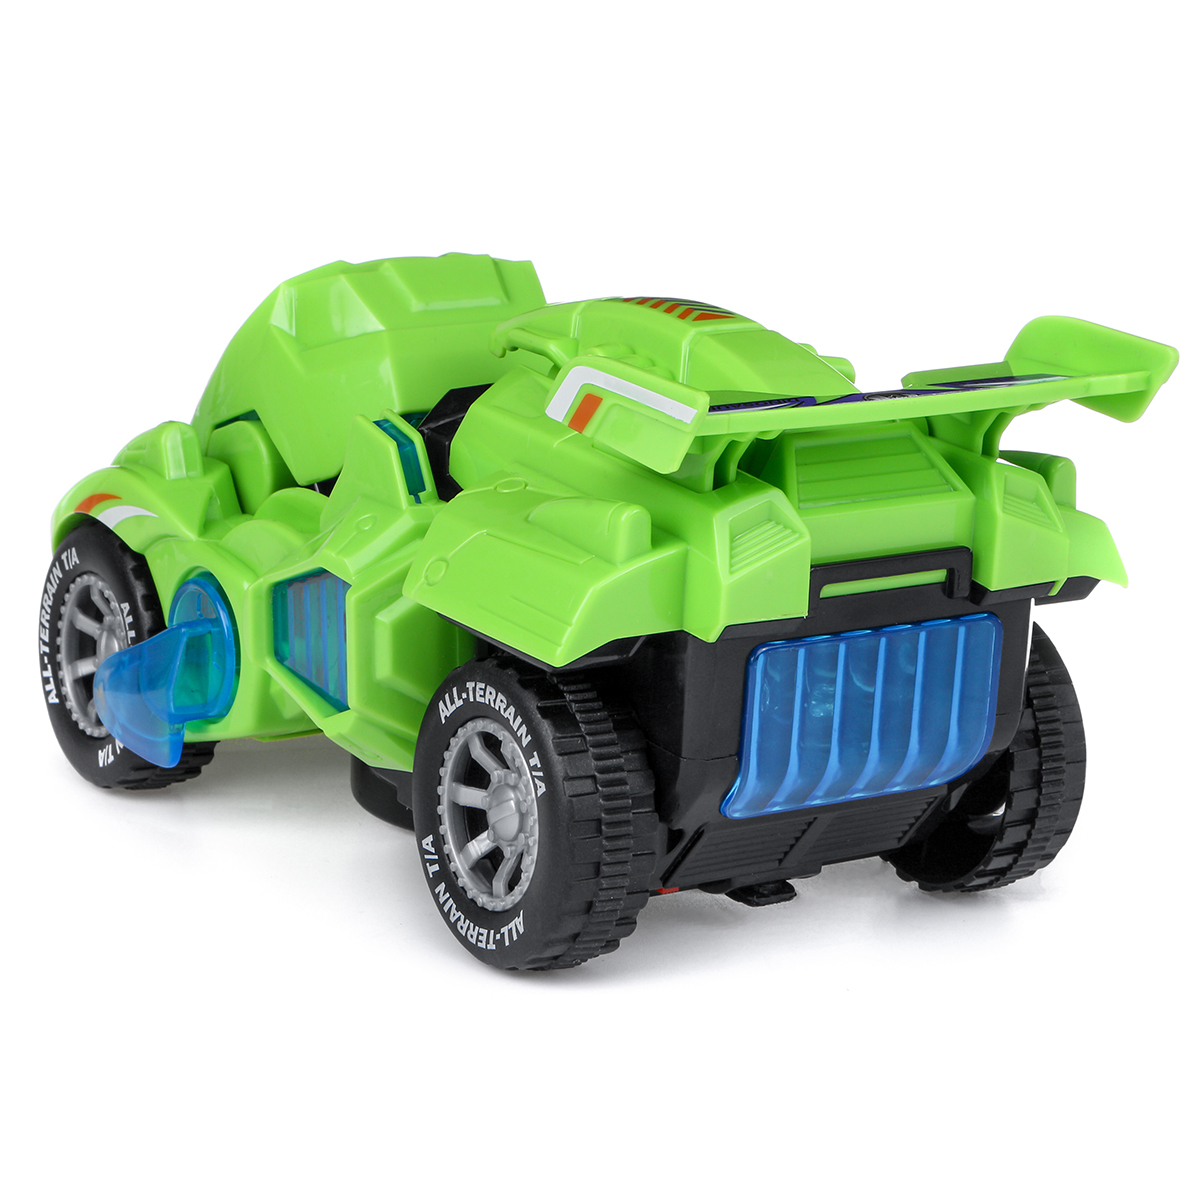 Creative-Dinosaur-Deformation-Toy-Car-Puzzle-Dinosaur-Electric-Toy-Car-Light-and-Music-Electric-Defo-1757309-14